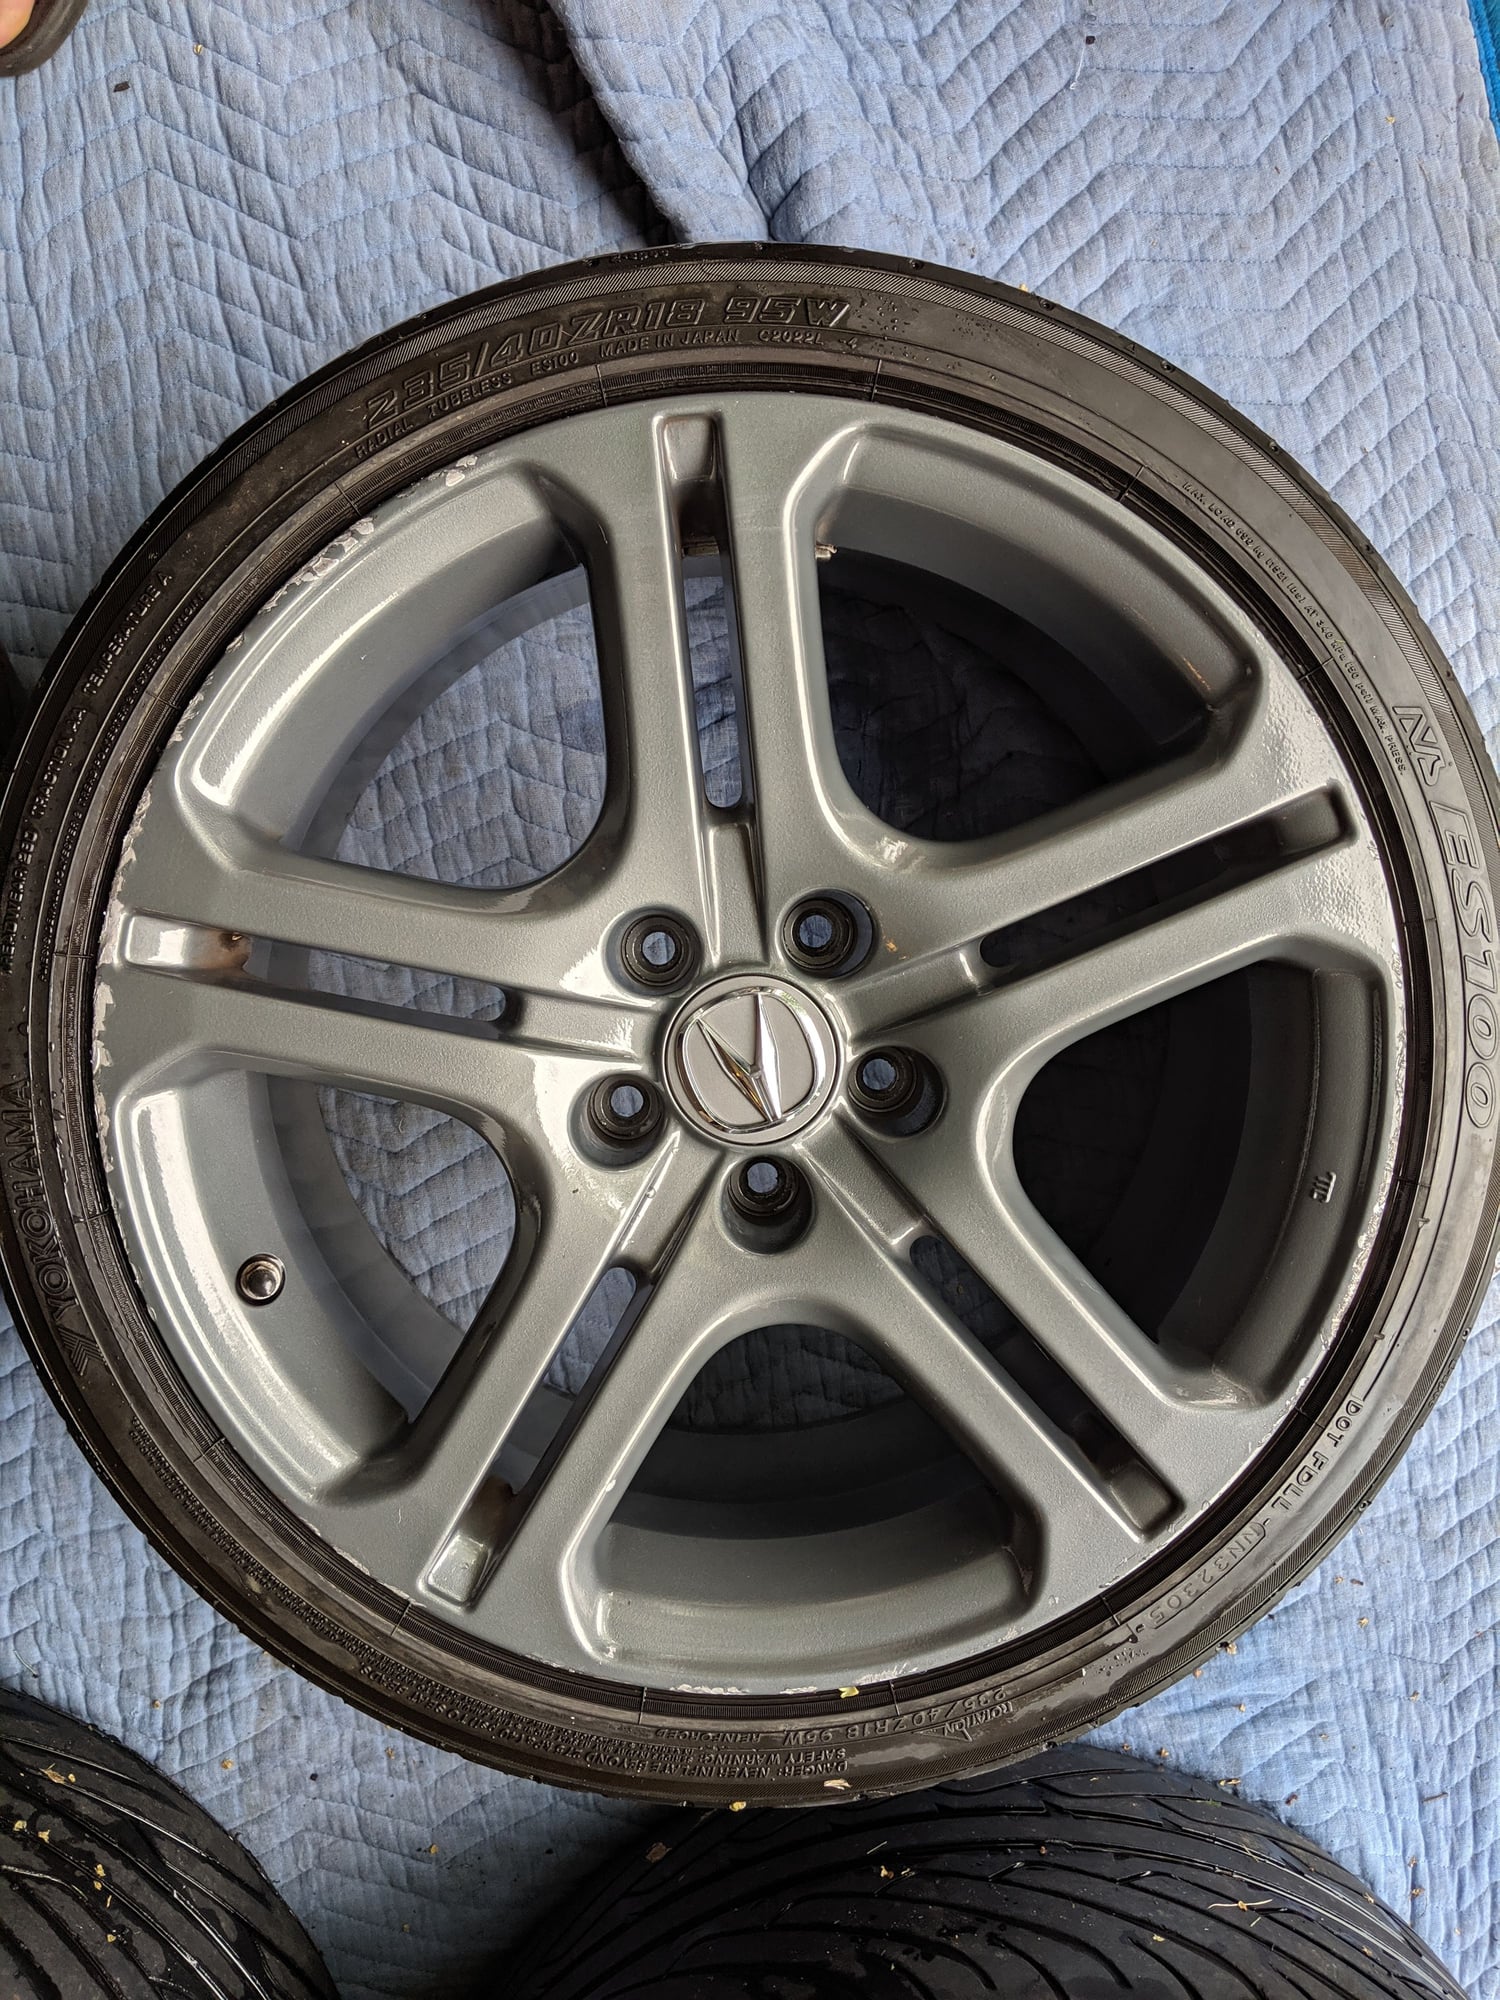 Wheels and Tires/Axles - FS: 18"x8.5" A-Spec Wheels - Used - 2004 to 2008 Acura TL - Chicago, IL 60007, United States